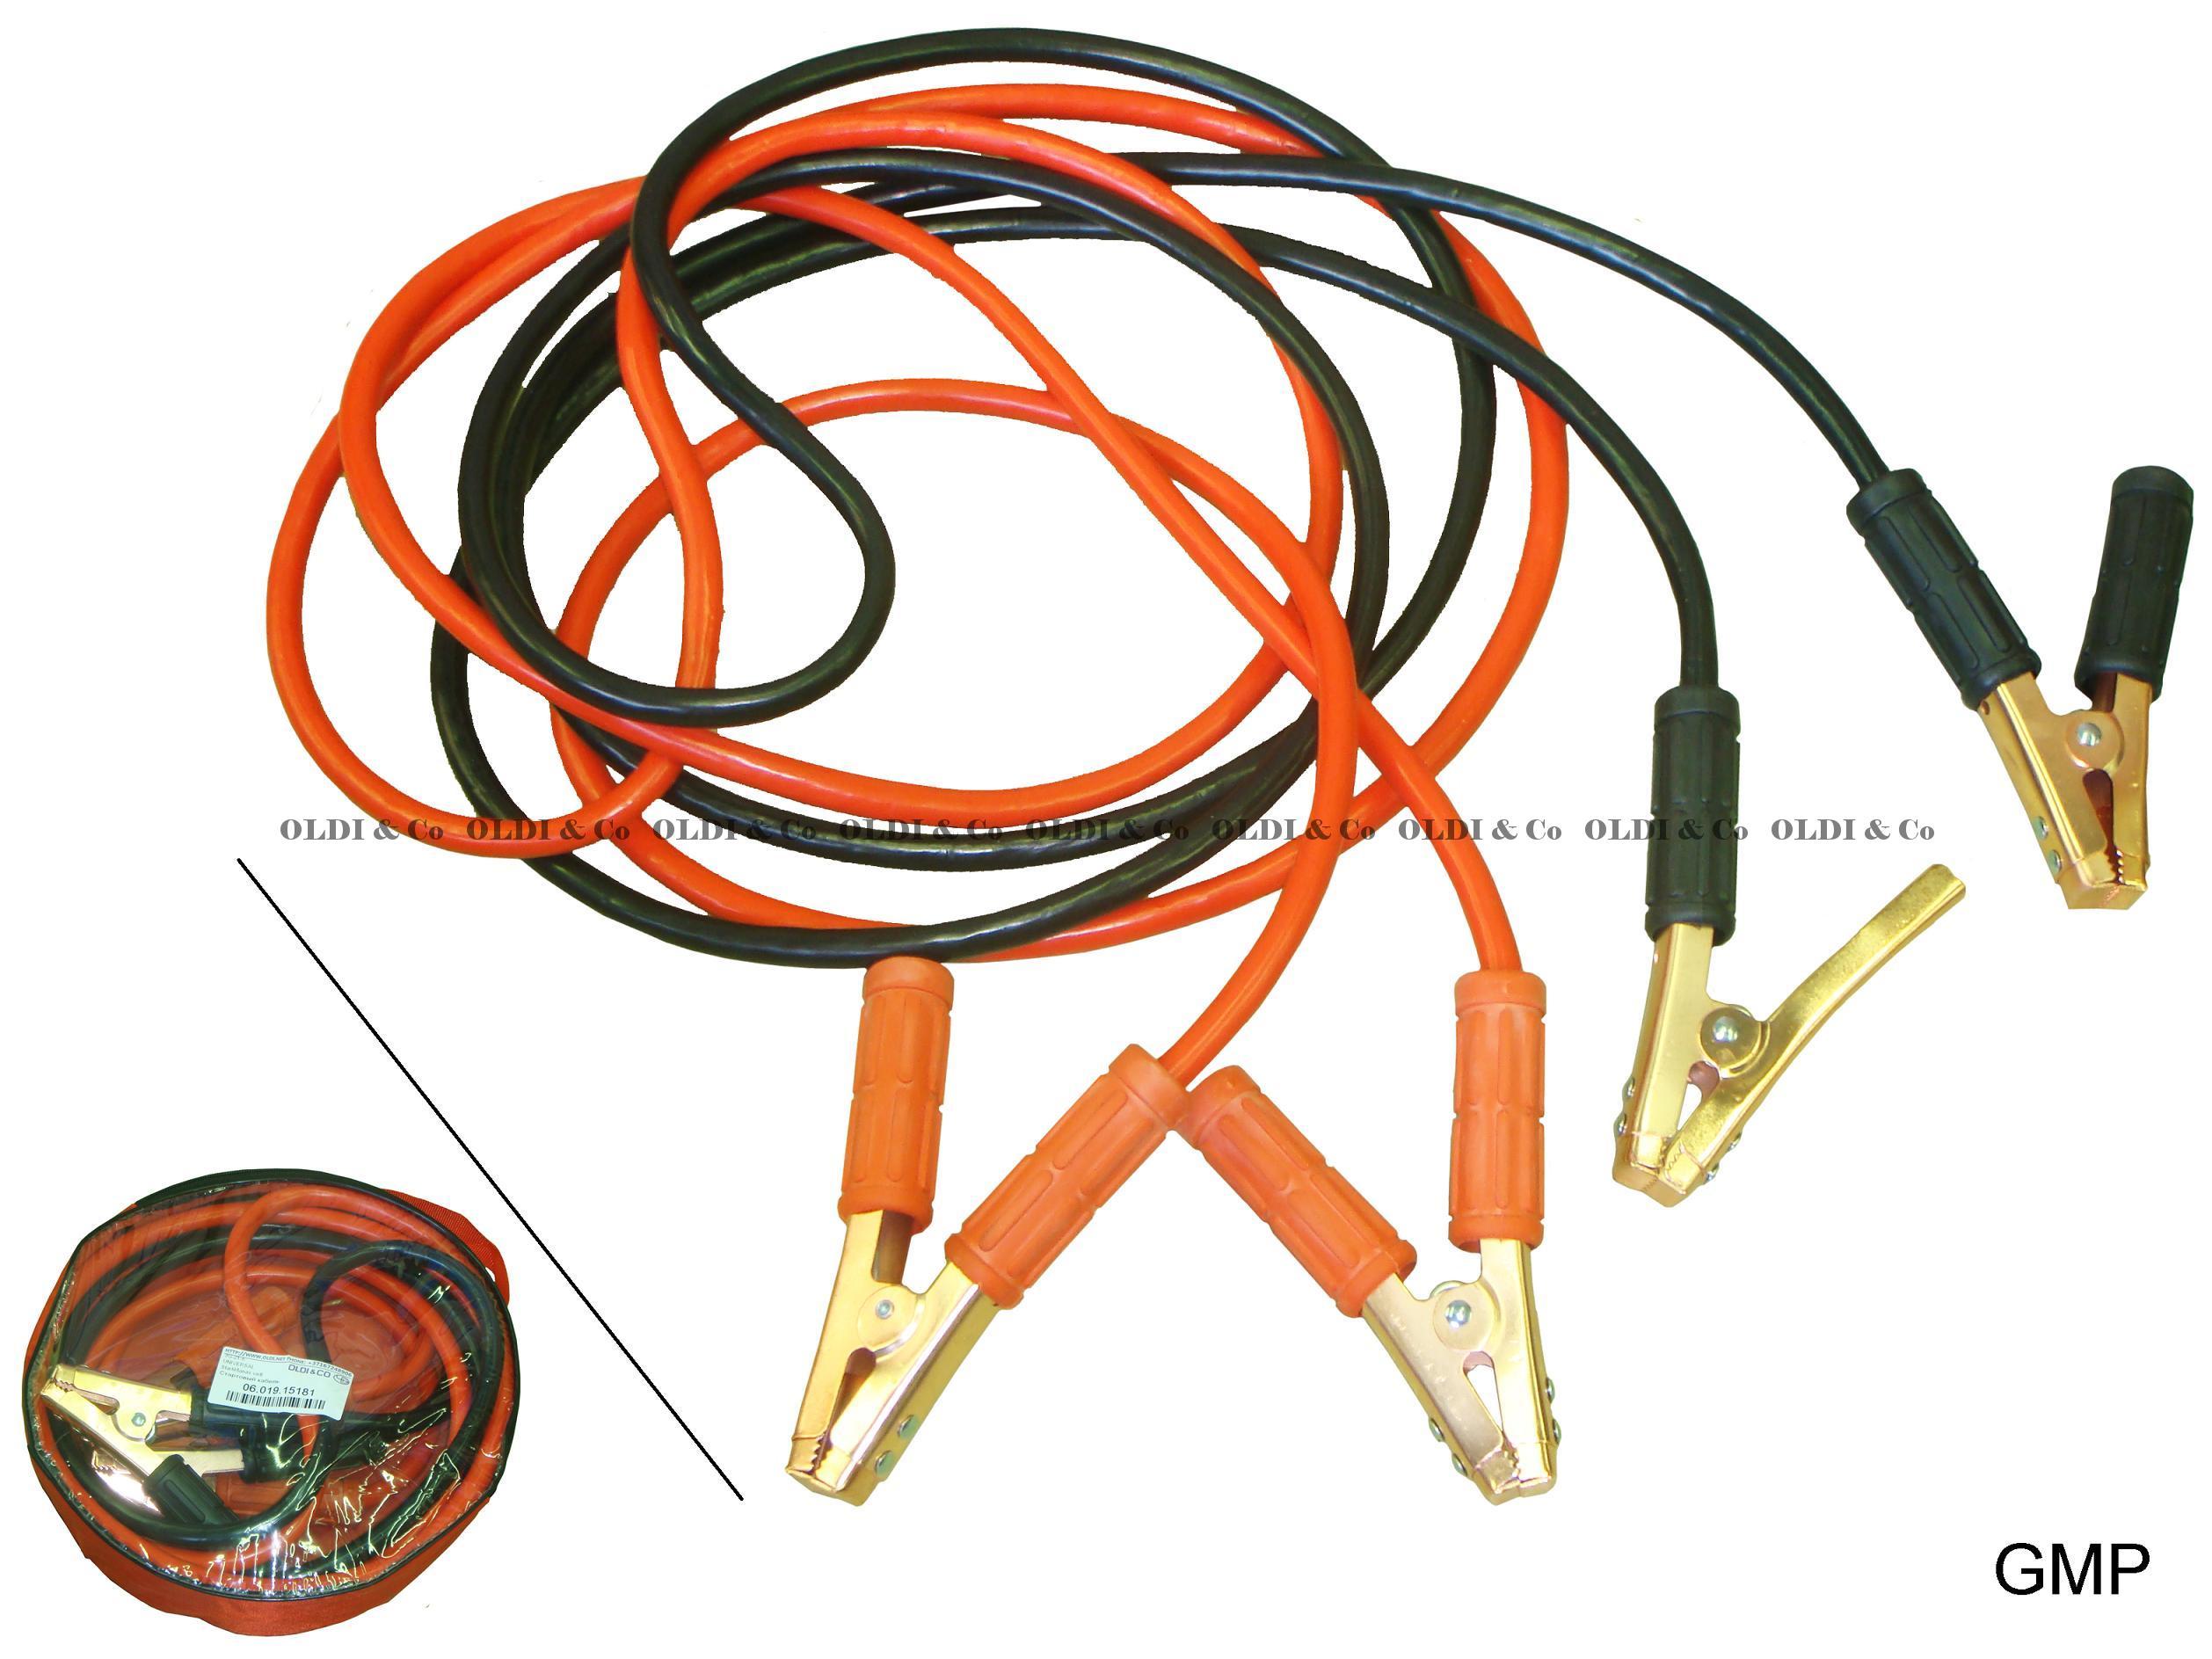 06.019.15181 Accessories → Starting cables